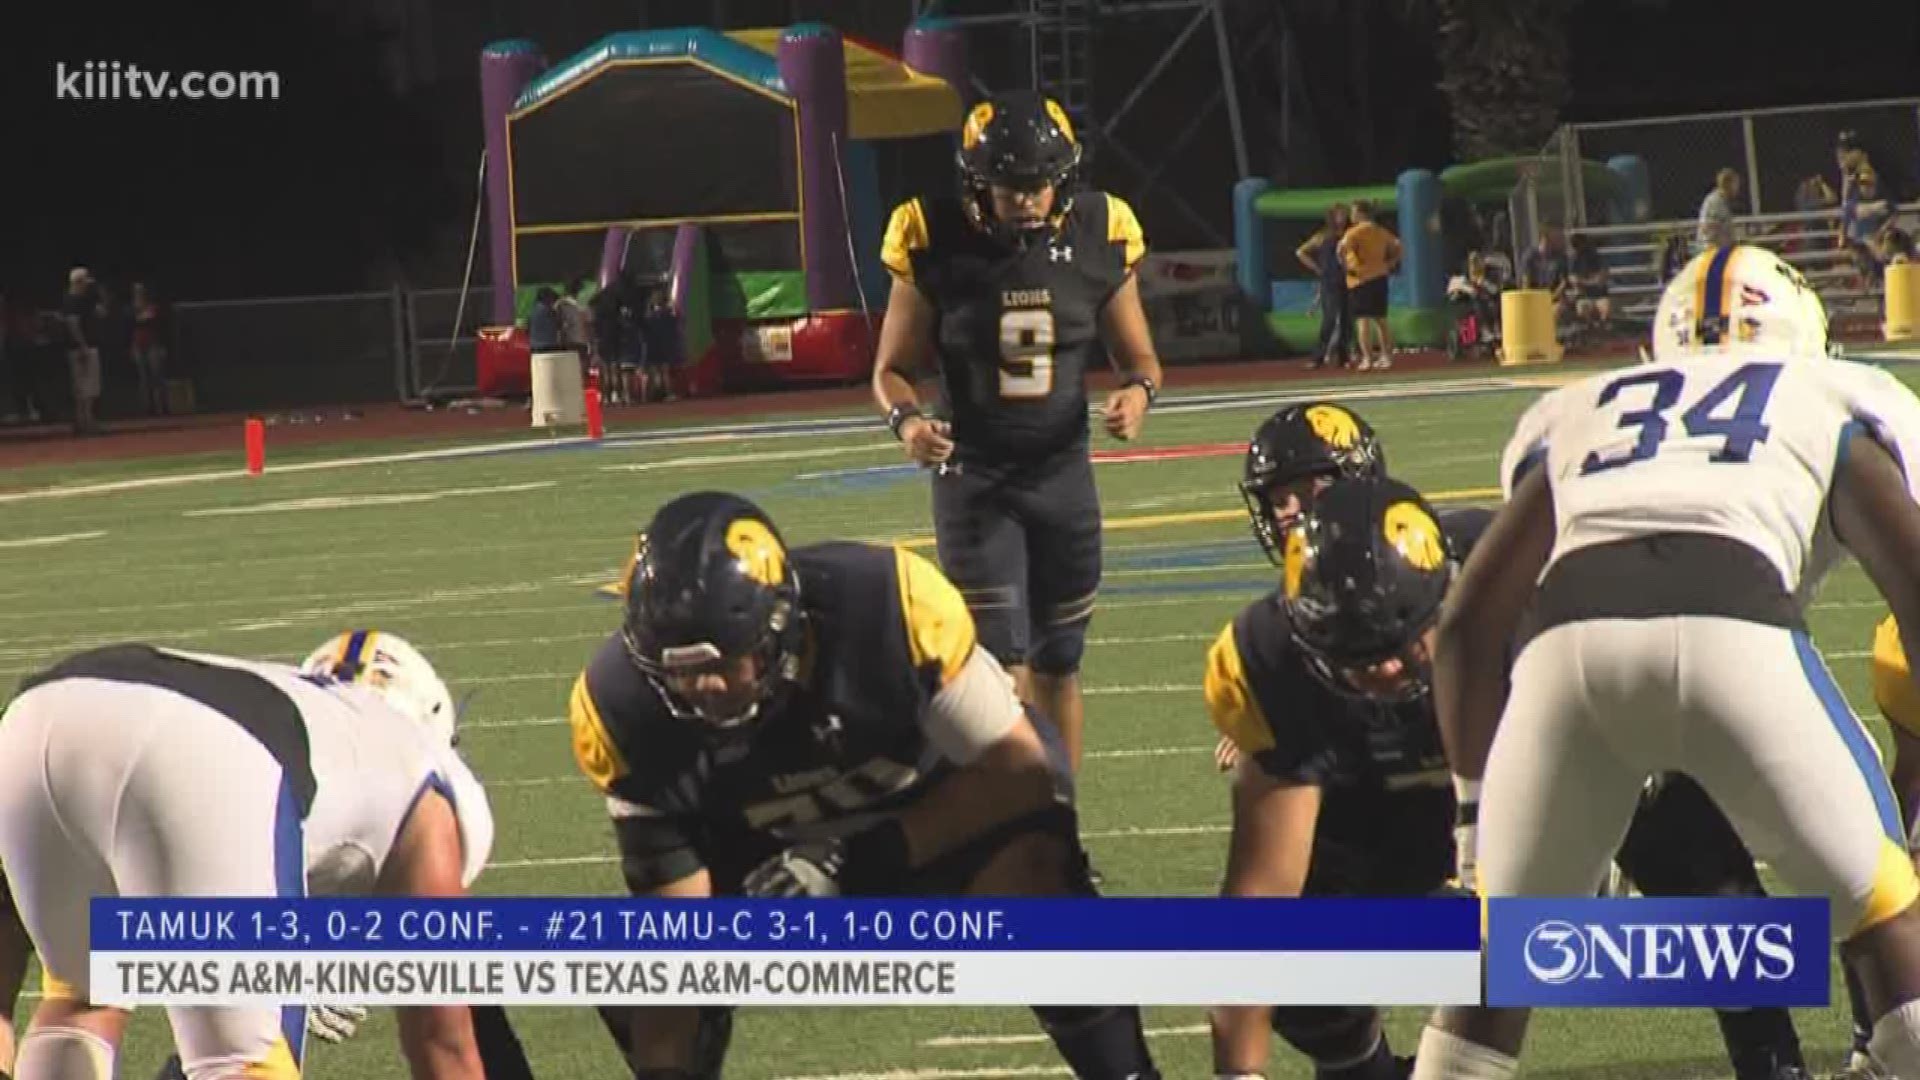 Texas A&M-Commerce topped Texas A&M-Kingsville 33-6.